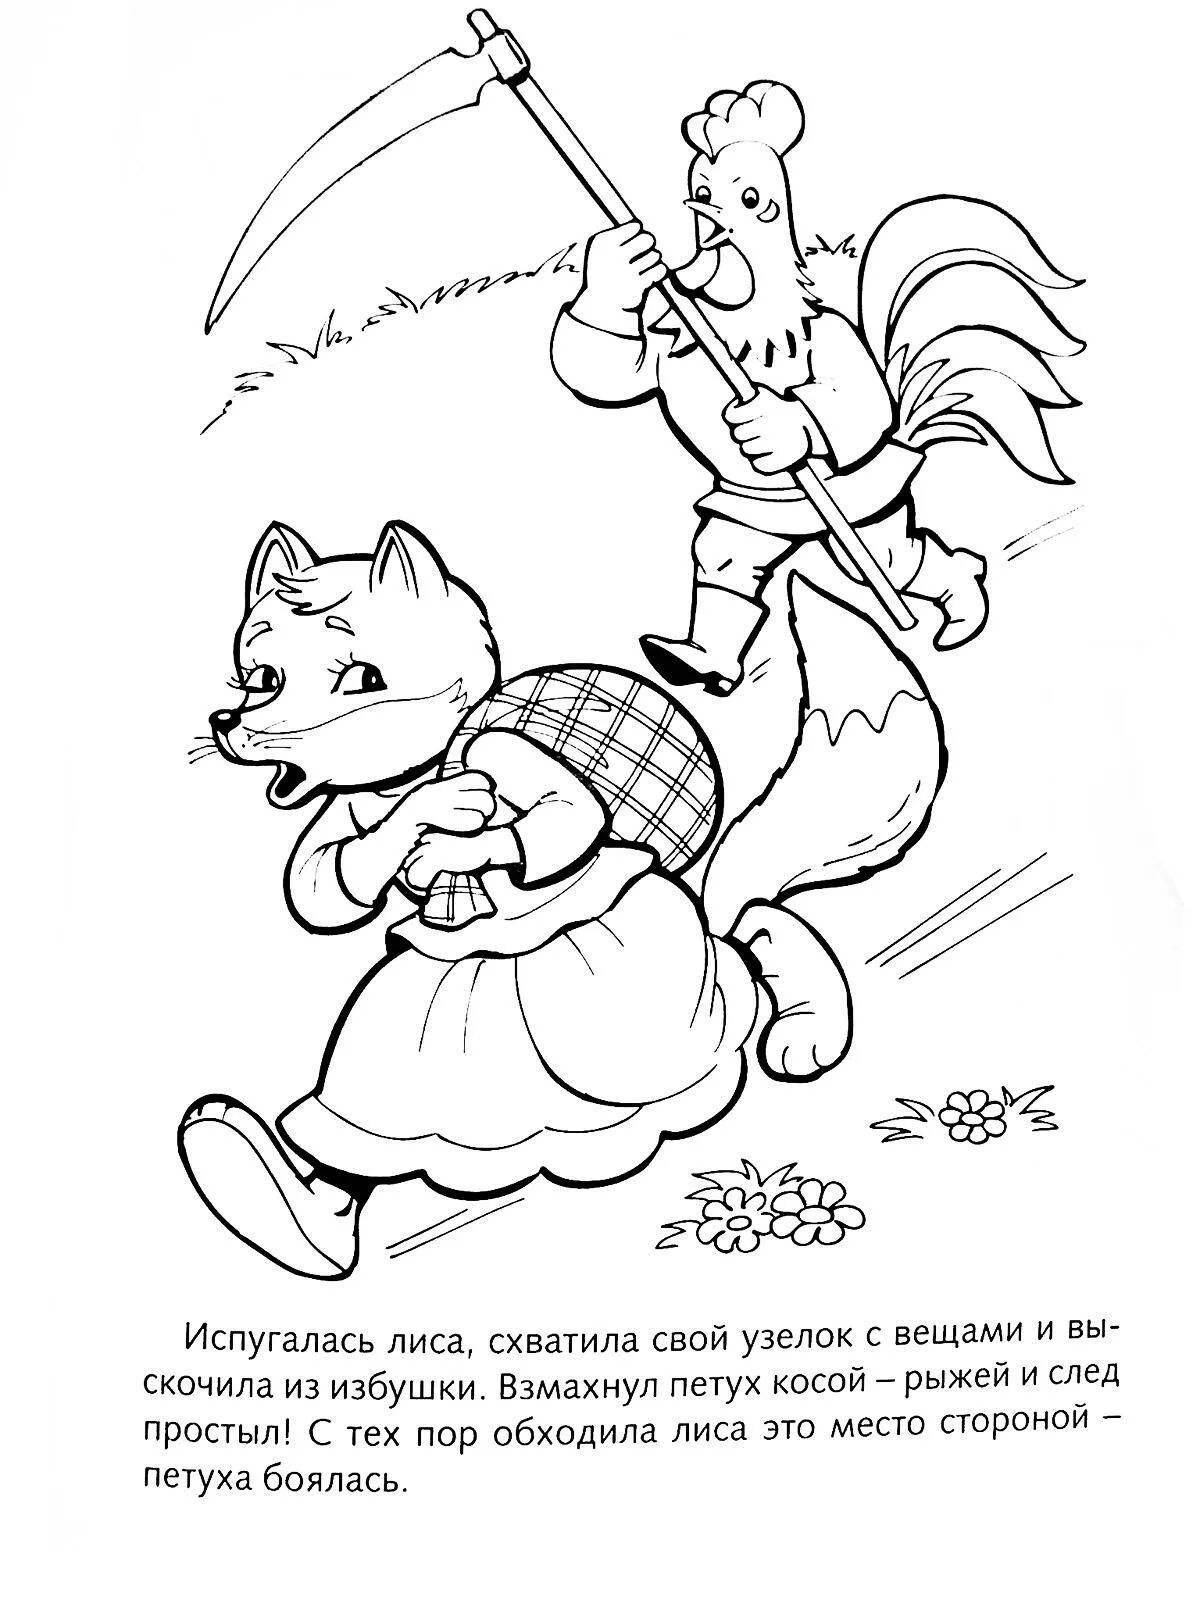 Delightful coloring of Russian fairy tales for children